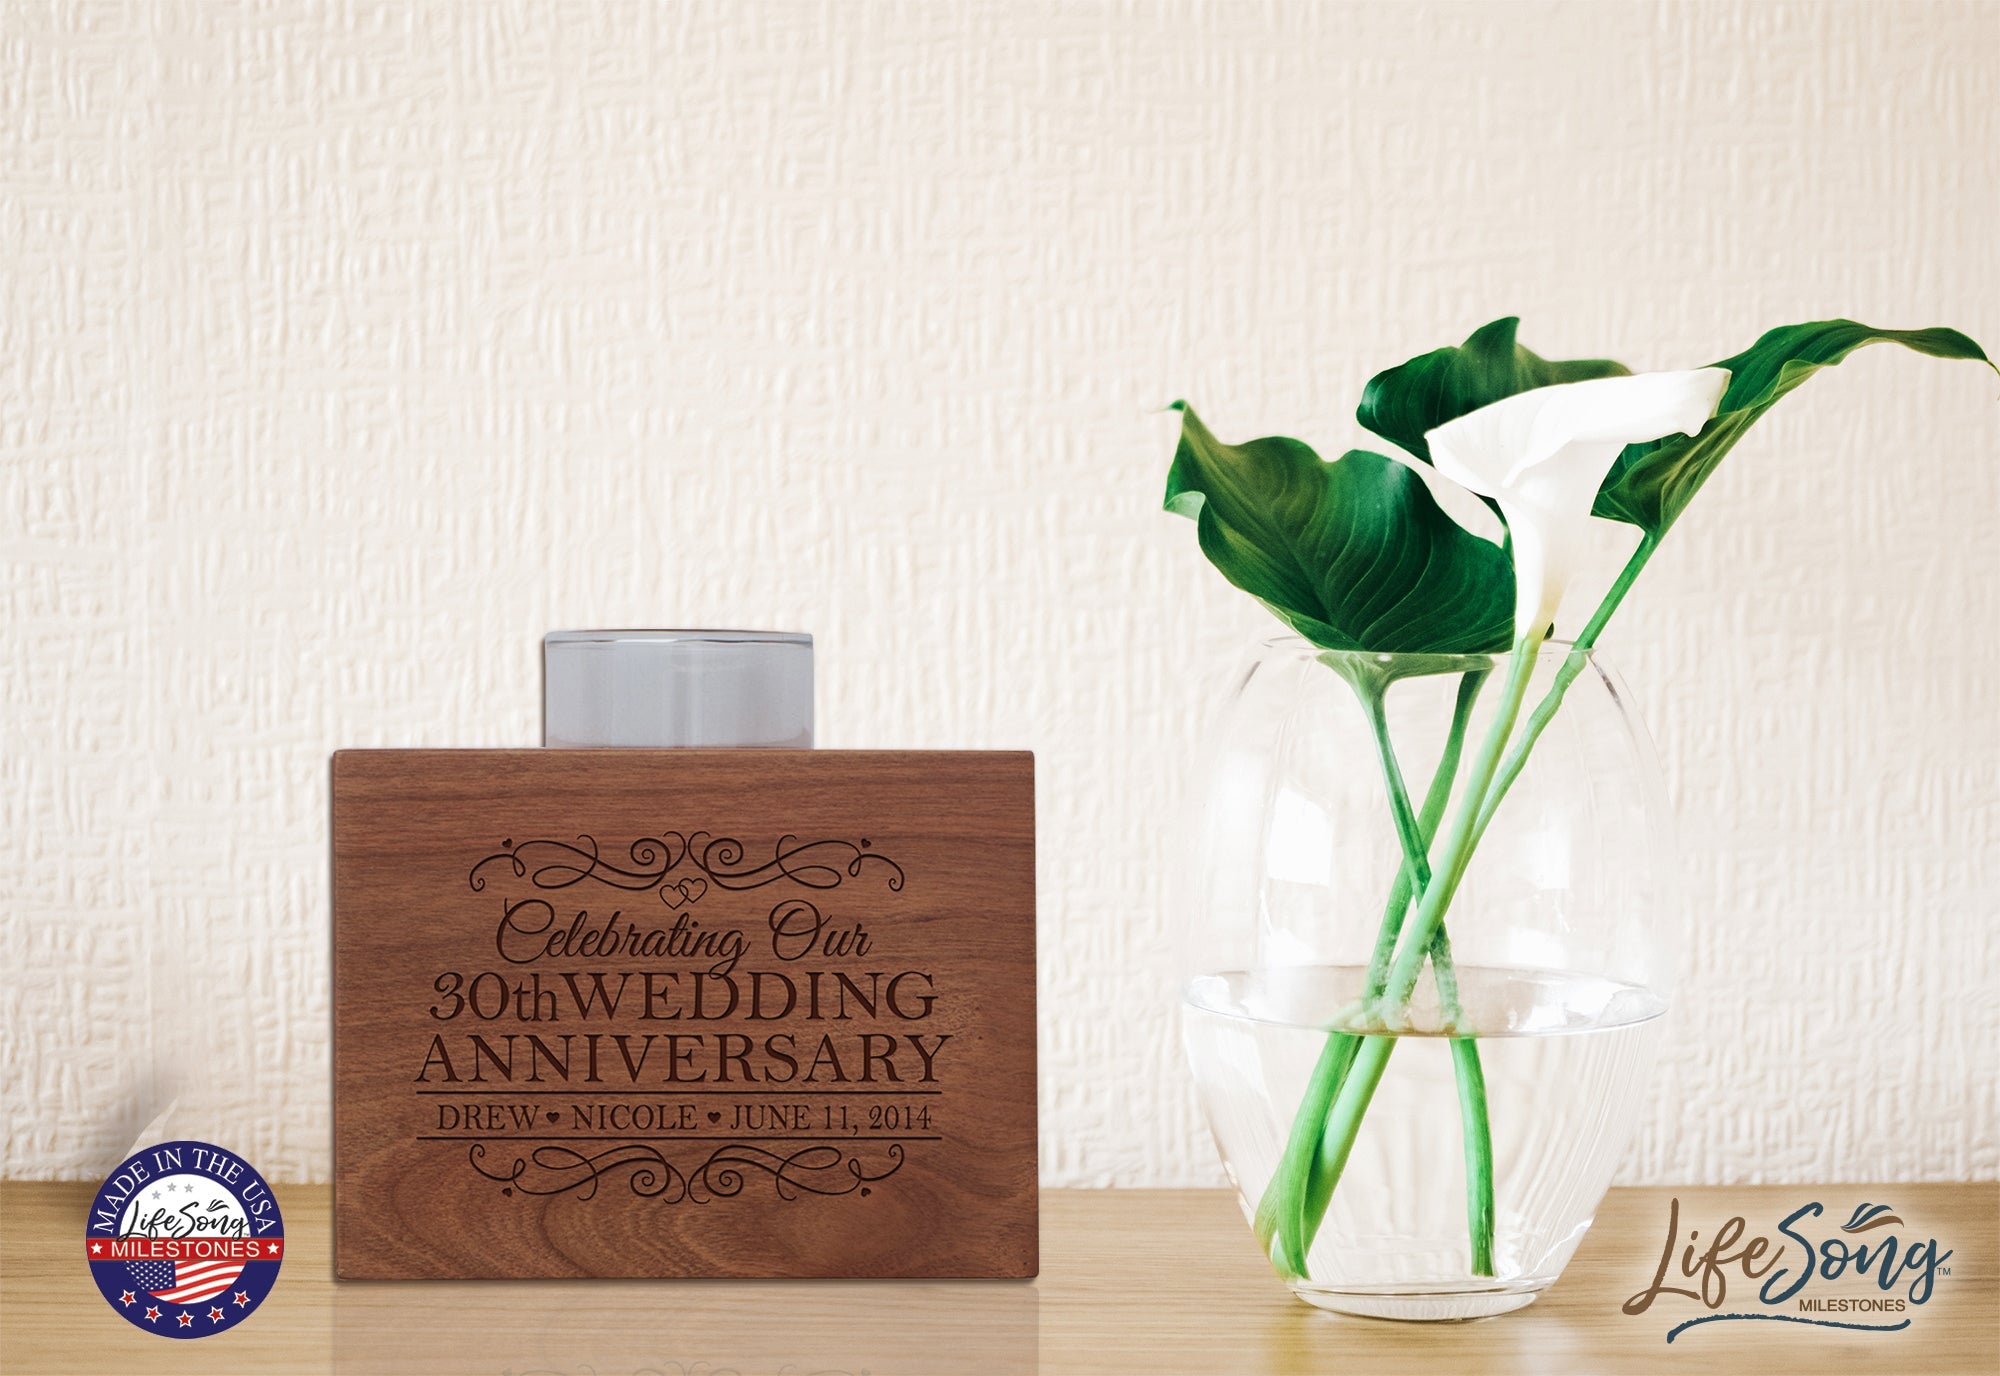 Personalized Cherry Wood Single Votive Candle Holder - 30th Wedding Anniversary - LifeSong Milestones